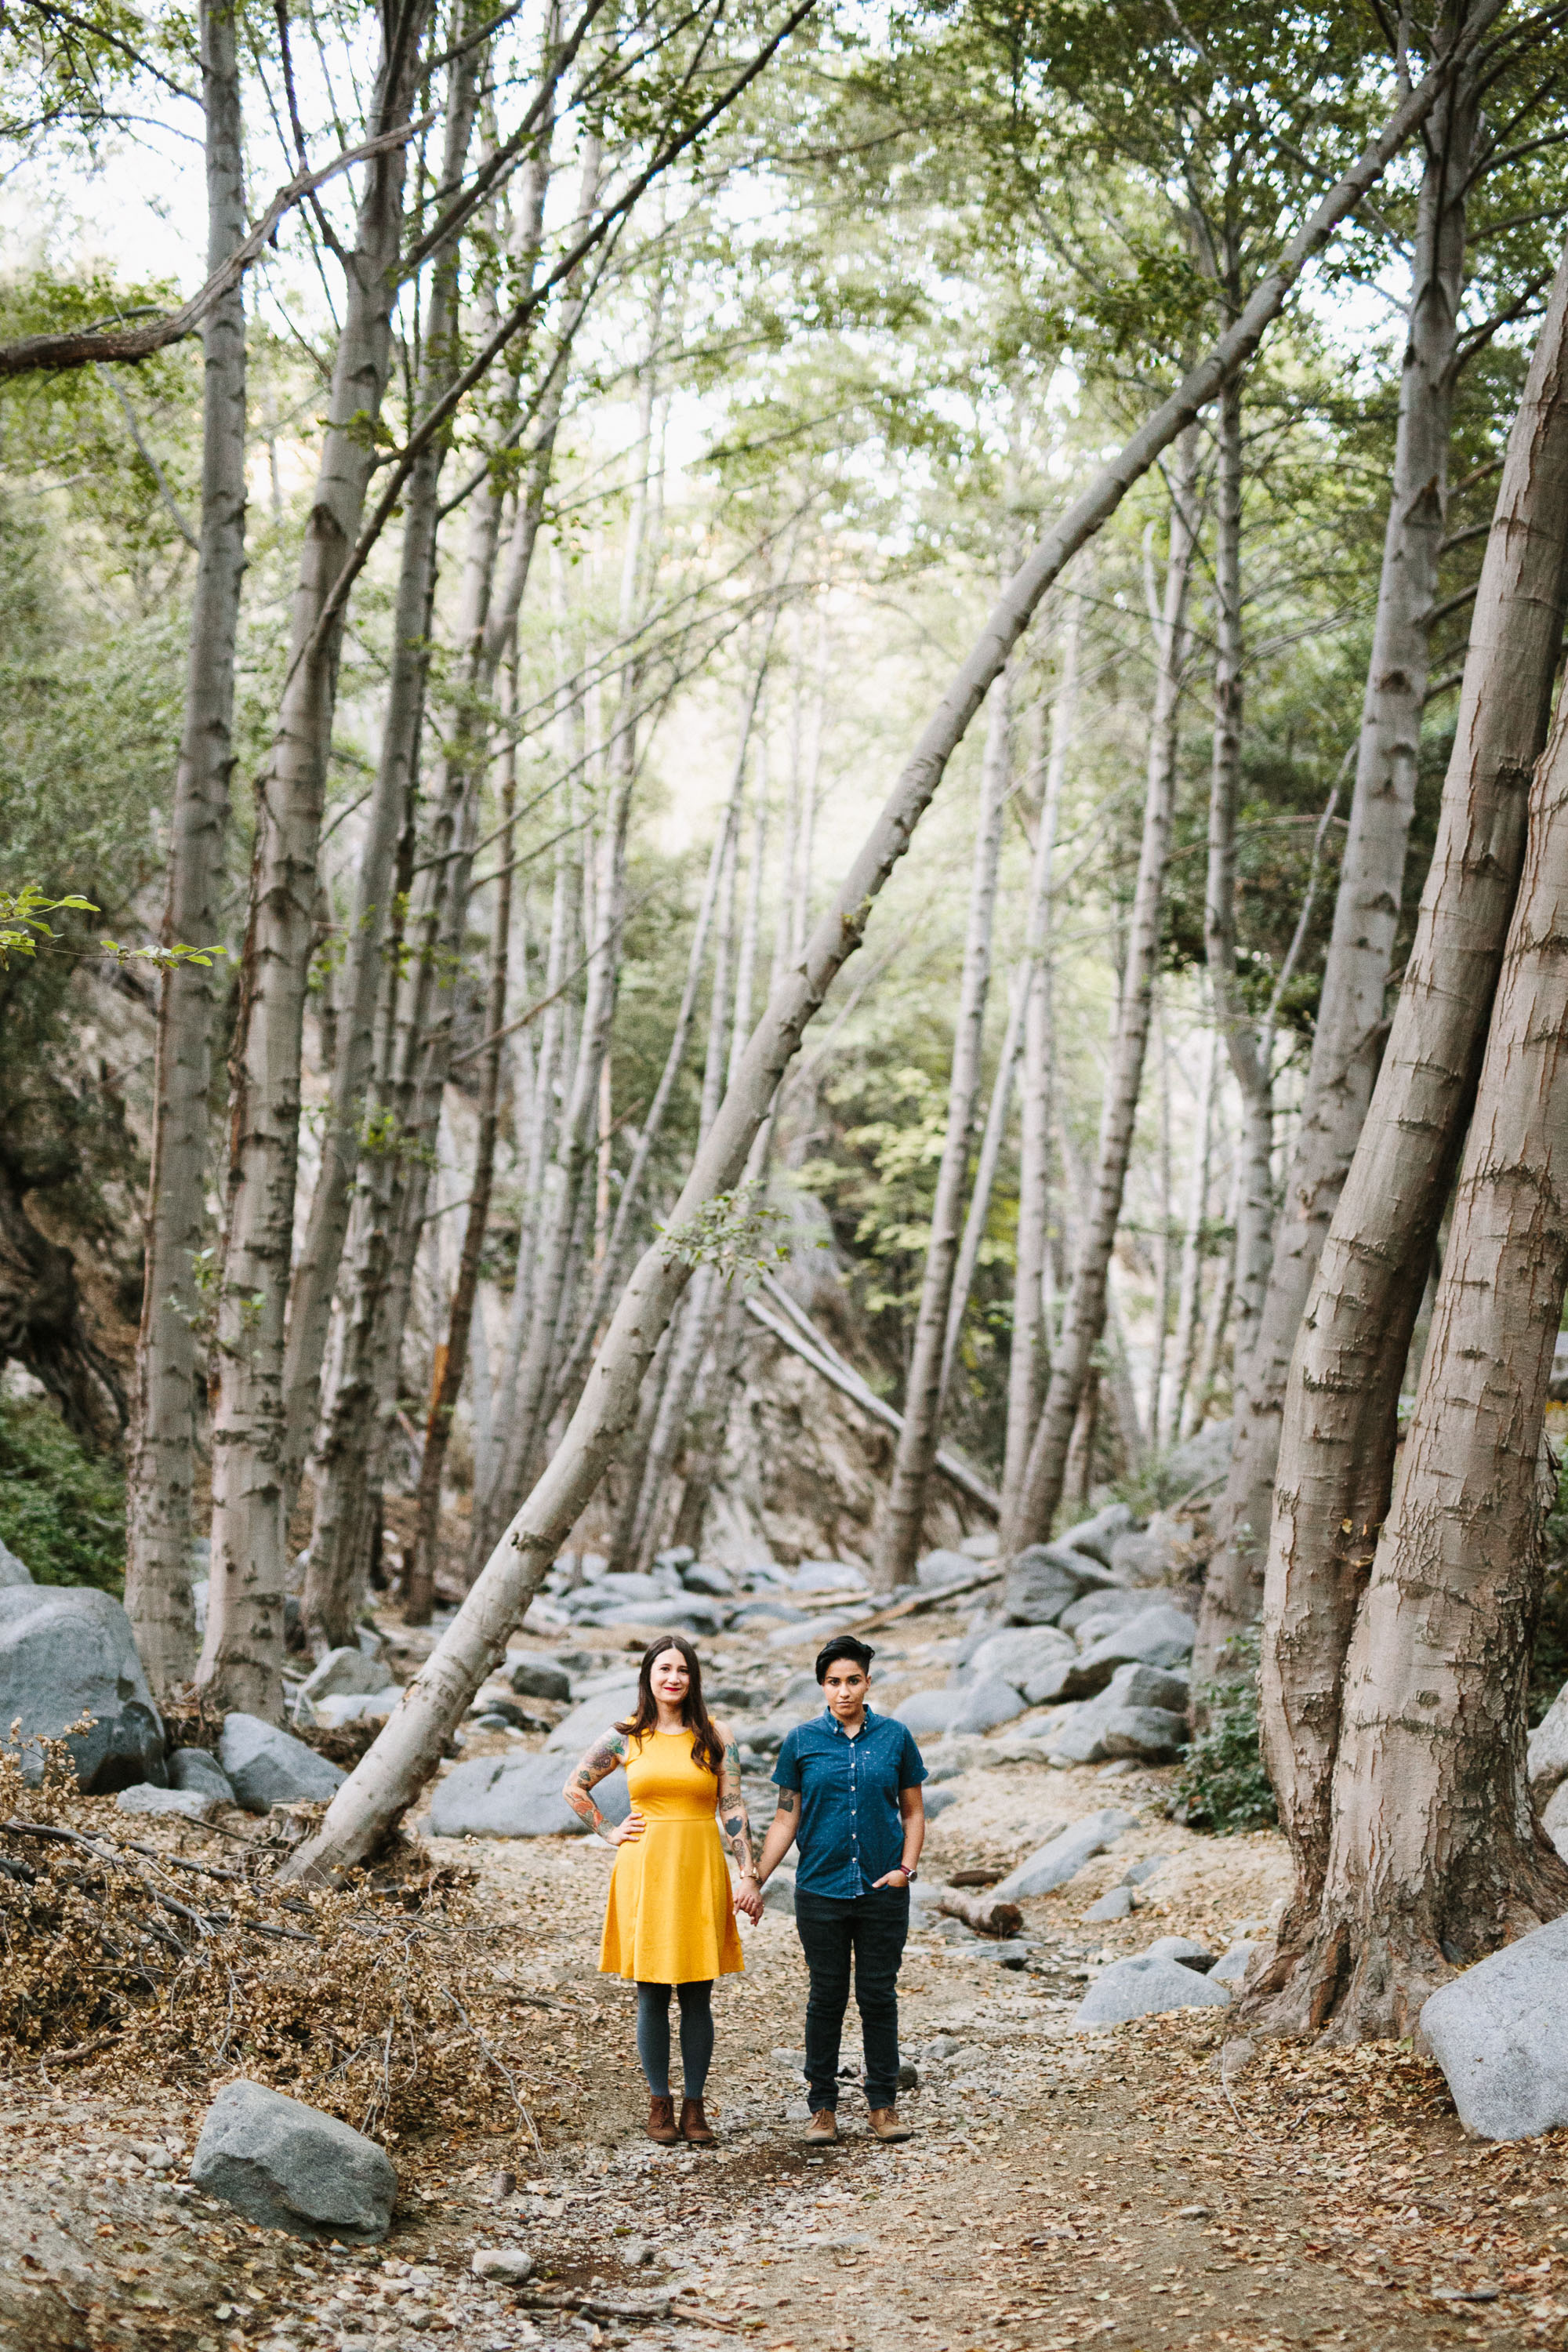 www-marycostaphotography-com-angeles-national-forest-engagement-0001